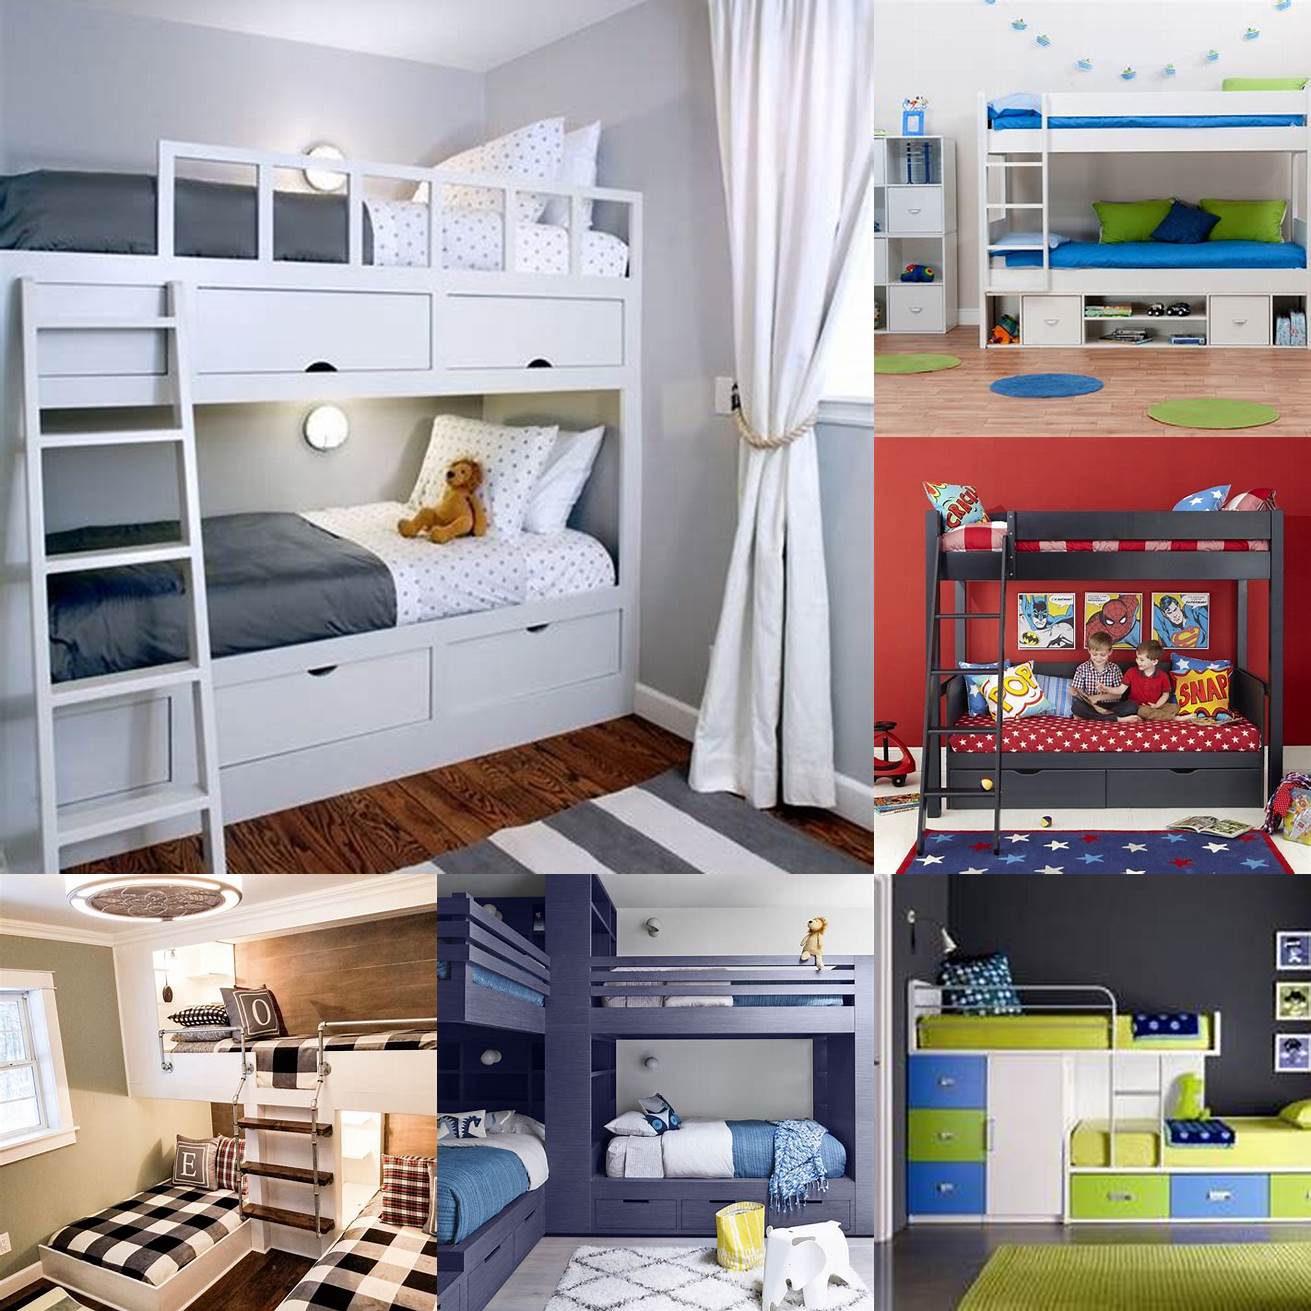 Space-saving Boys bunk beds are great for smaller rooms where space is limited